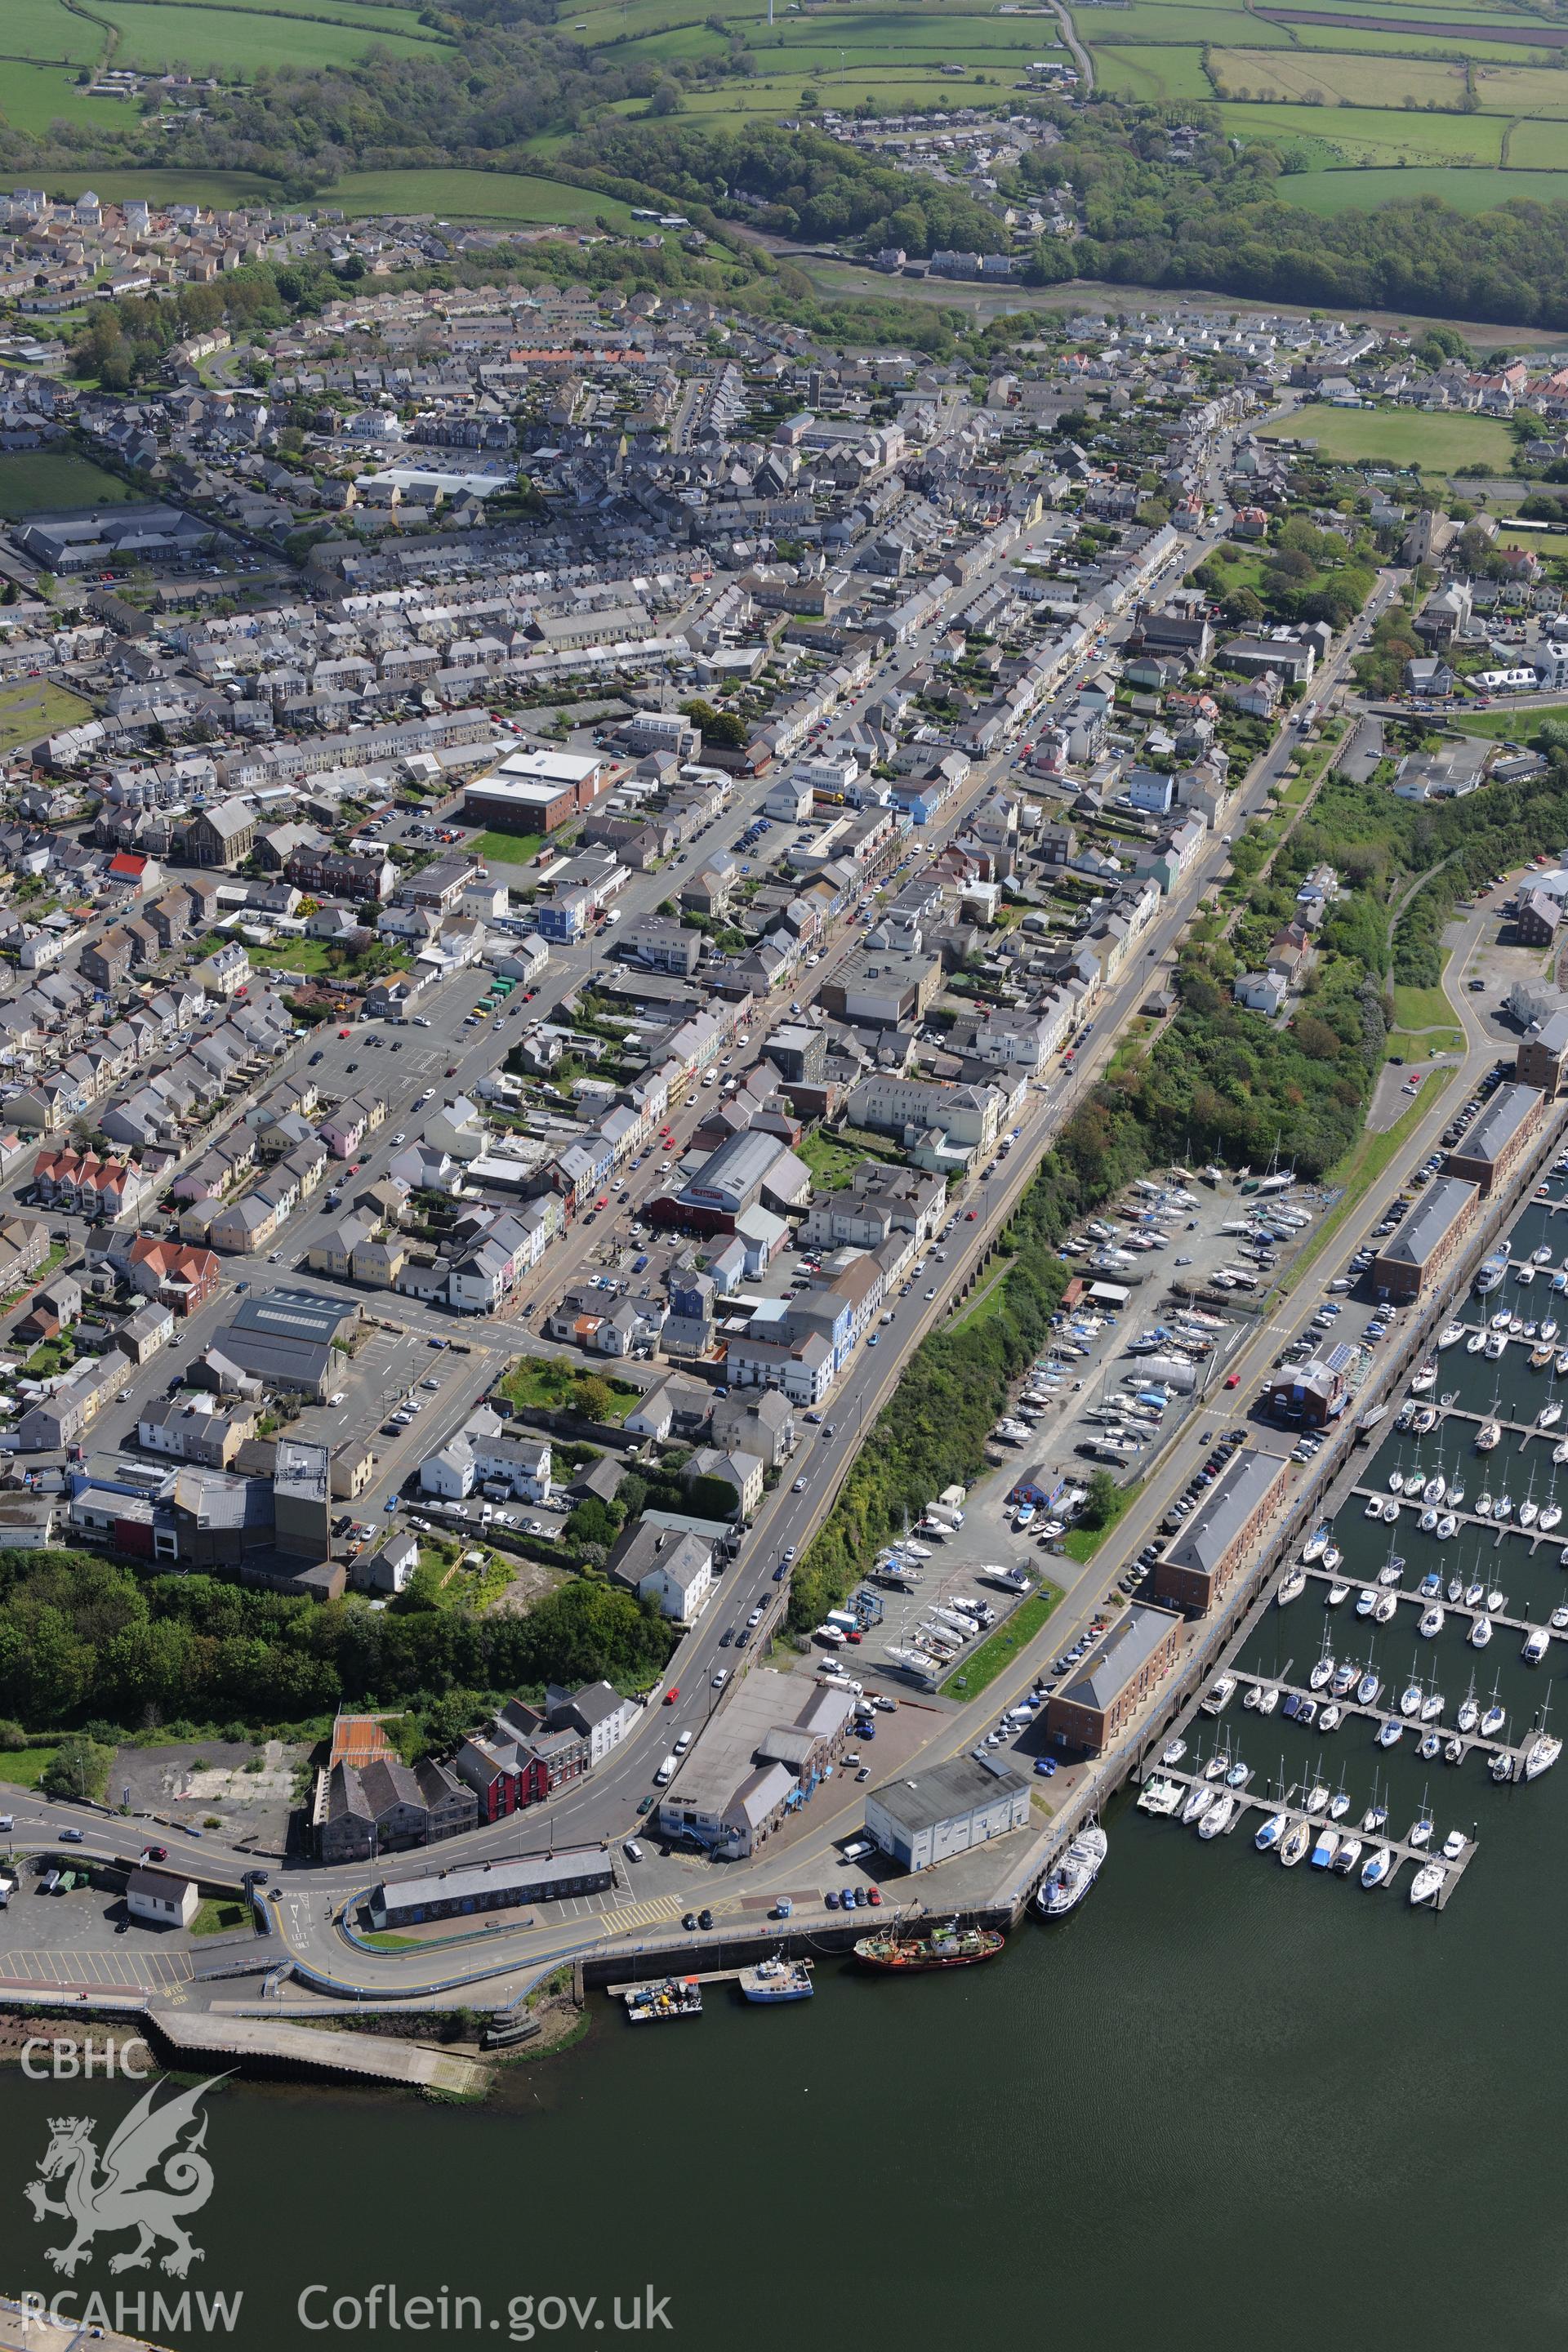 Milford Haven docks and the town of Milford Haven, Pembrokeshire. Oblique aerial photograph taken during the Royal Commission's programme of archaeological aerial reconnaissance by Toby Driver on 13th May 2015.